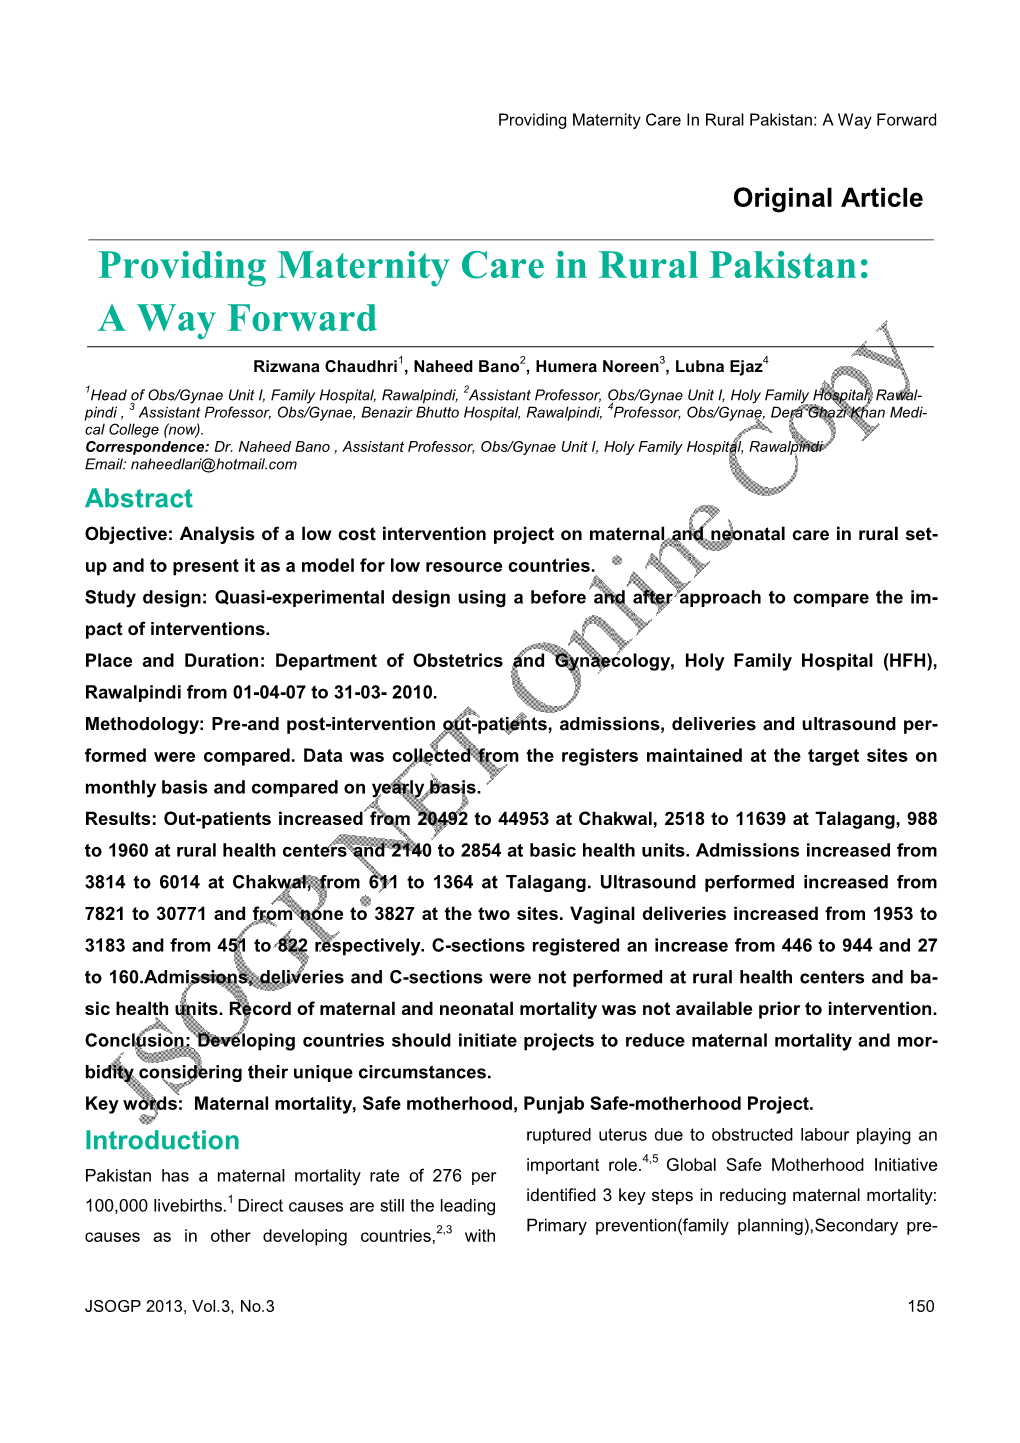 Providing Maternity Care in Rural Pakistan a Way